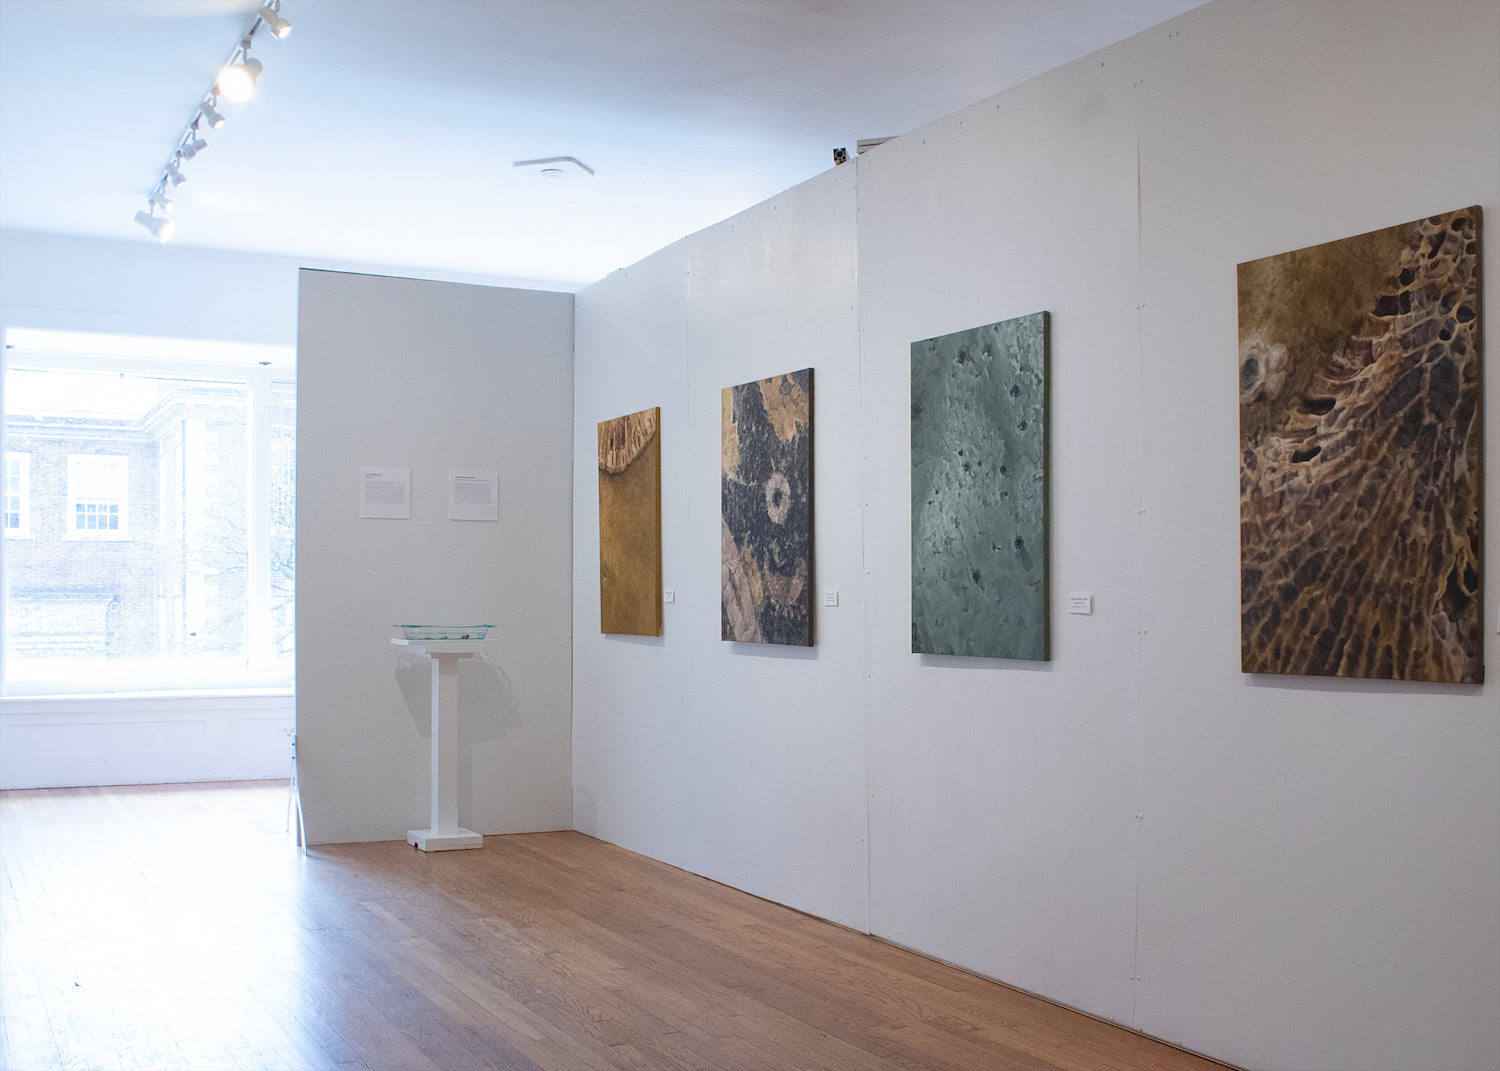 A gallery space with white walls and wood floors, exhibiting the four, medium sized paintings next to the rock display and artist statement.